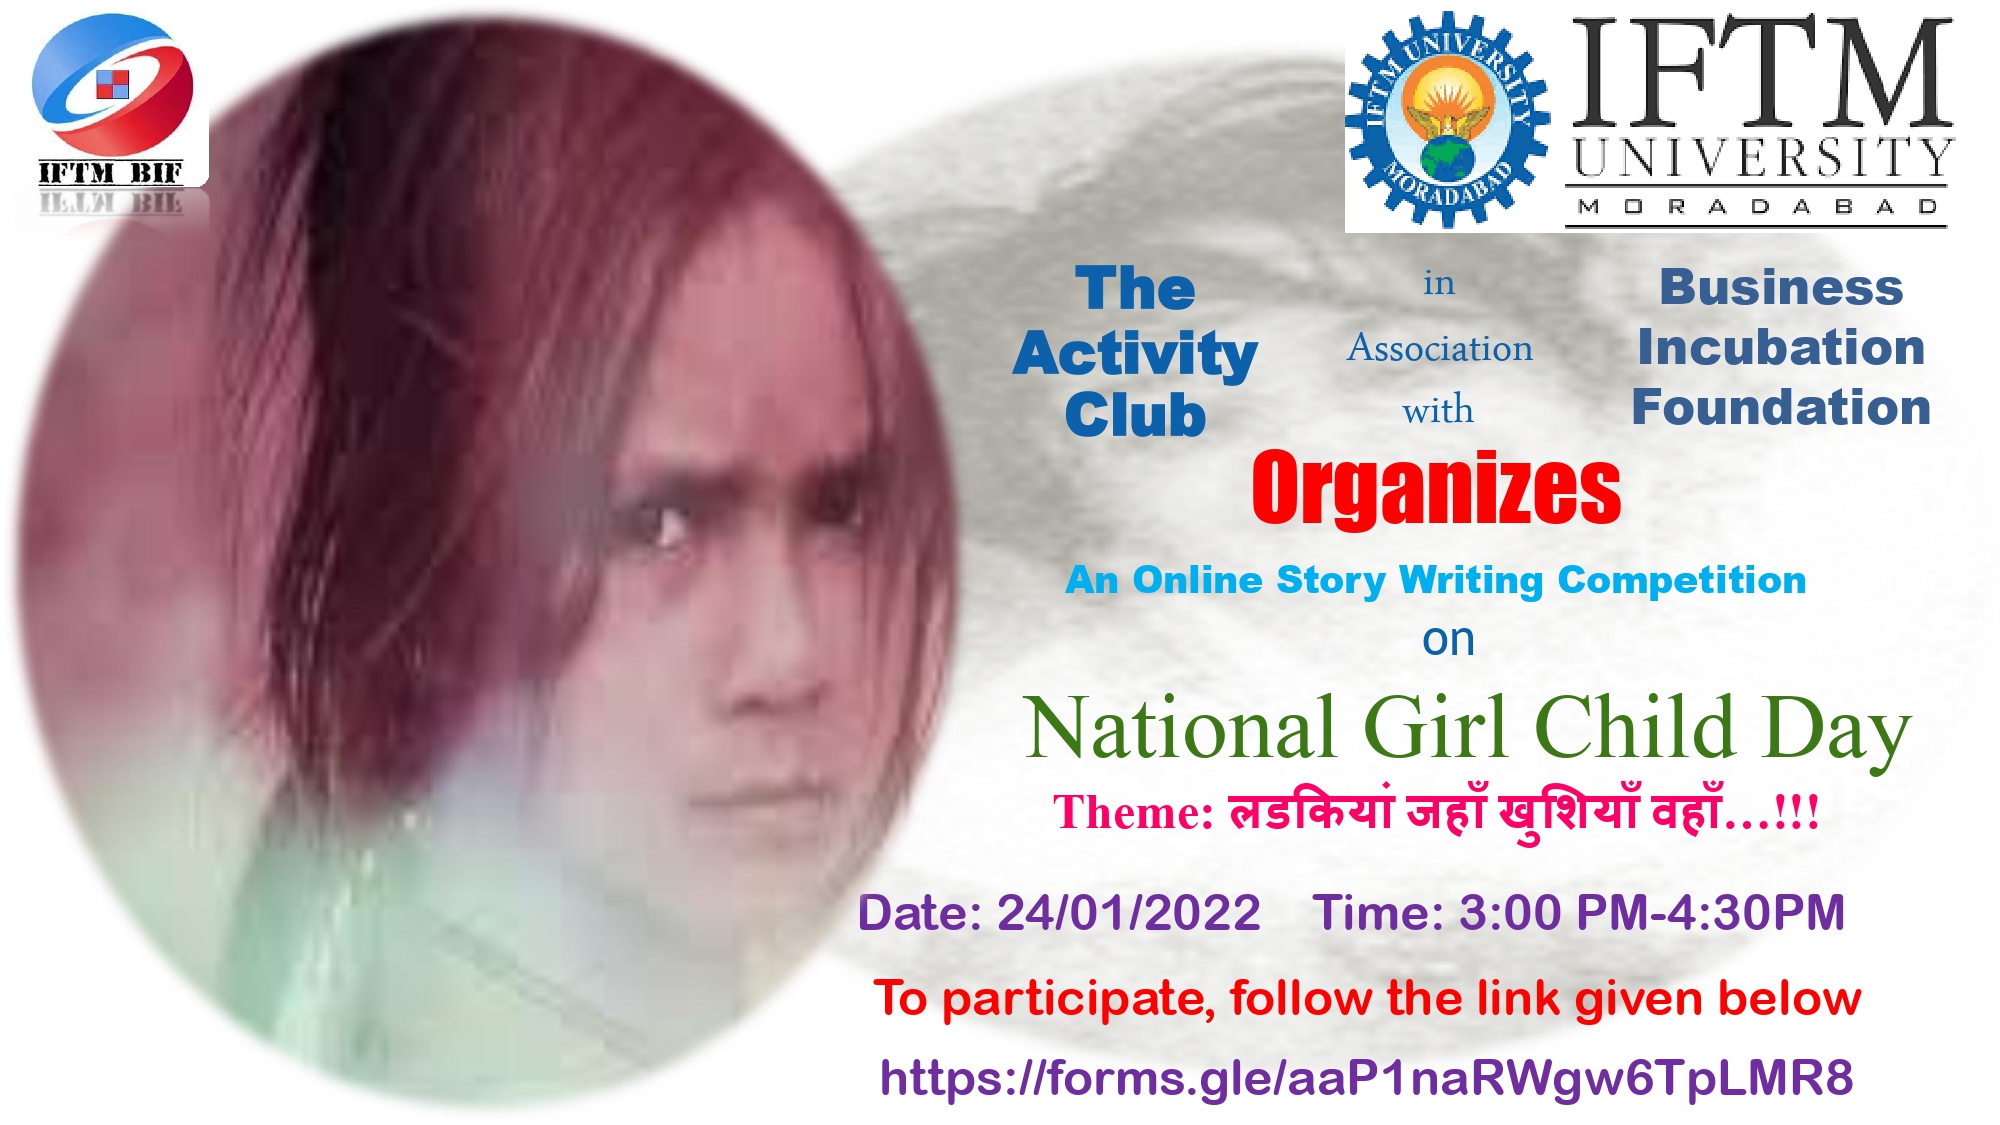 Online Story Writing Competition in National Girl Child Day in association with Bsiness Incubation Foundation